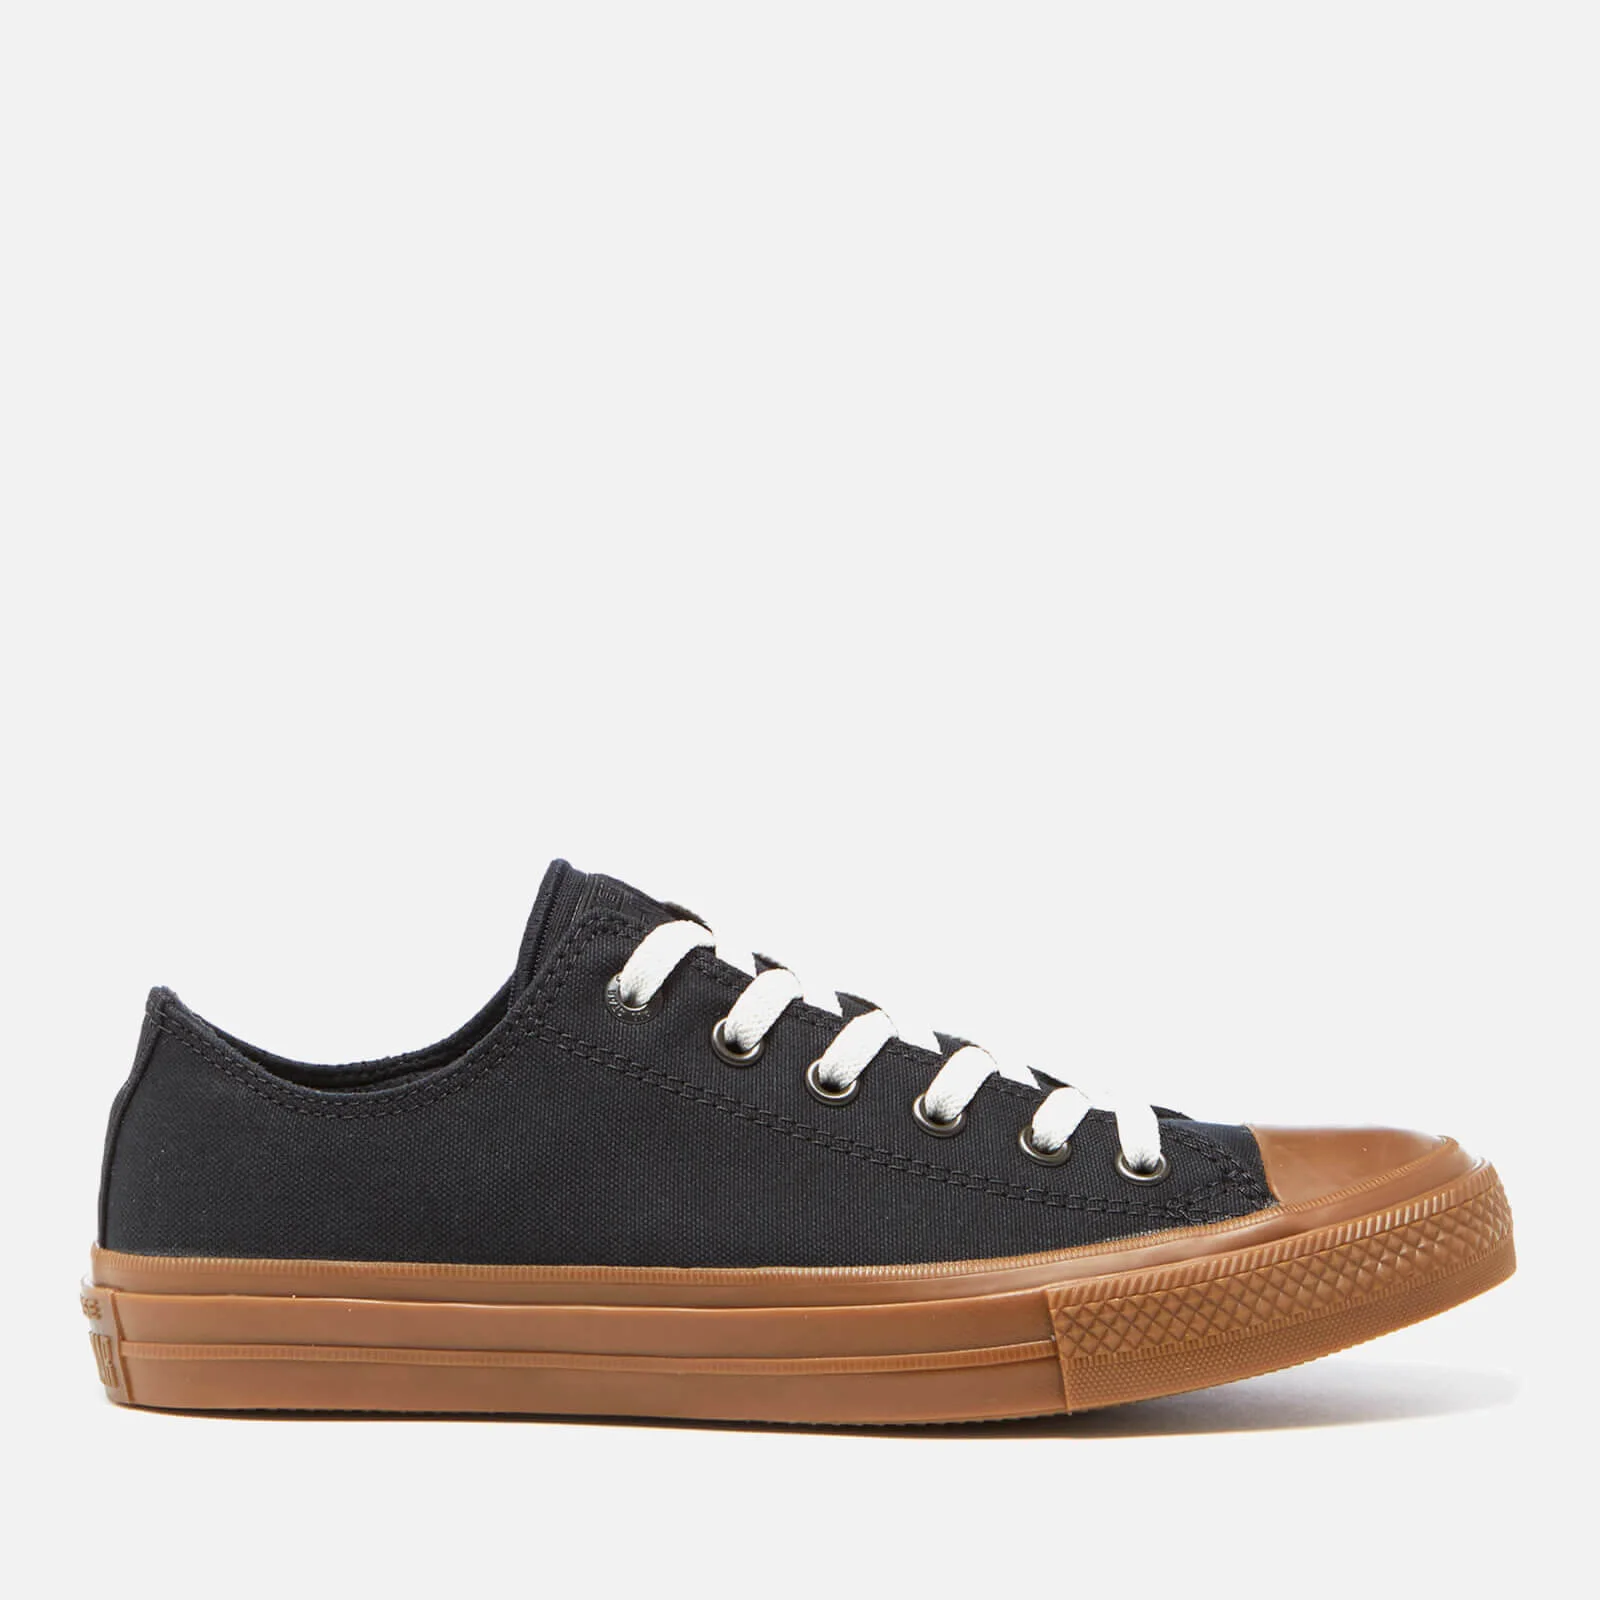 Converse Men's Chuck Taylor All Star II Ox Trainers - Black/Gum Image 1